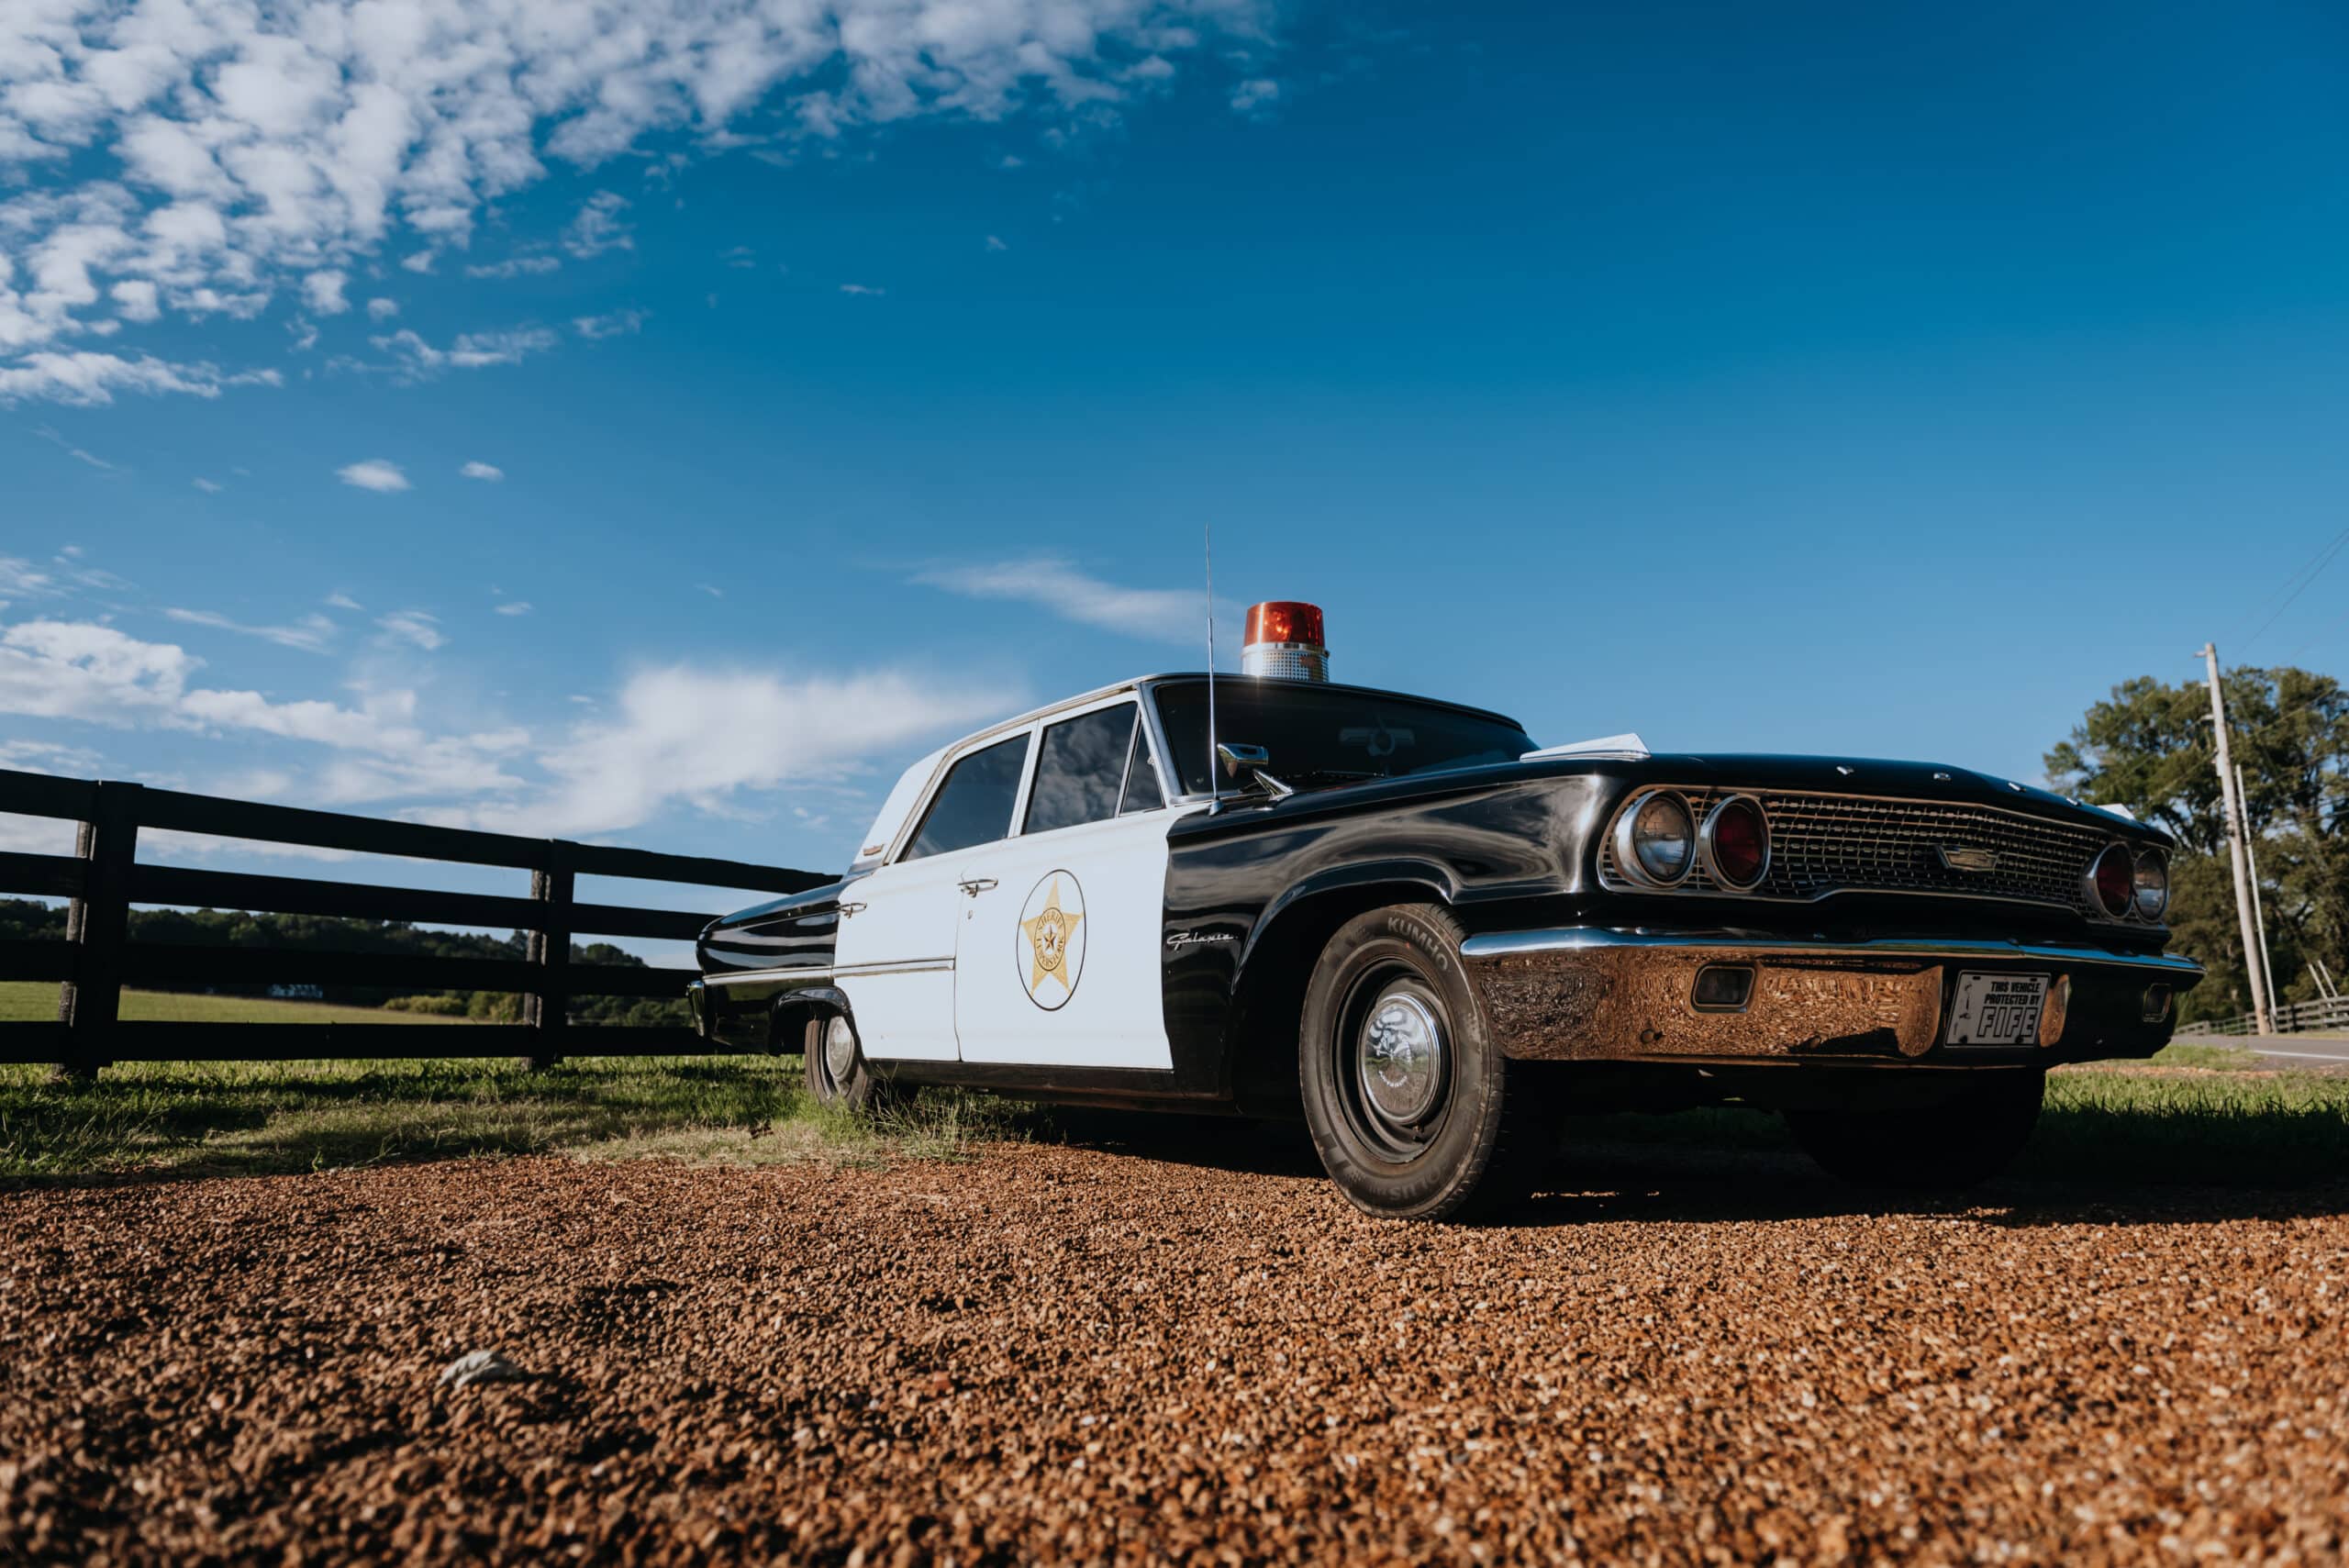 A replica of the squad car driven by Andy Griffith on the Andy Griffith Show greets visitors to the village of Leiper's Fork along Old Hillsboro Road just outside downtown Franklin, Tennessee. (Photo courtesy of Visit Franklin)